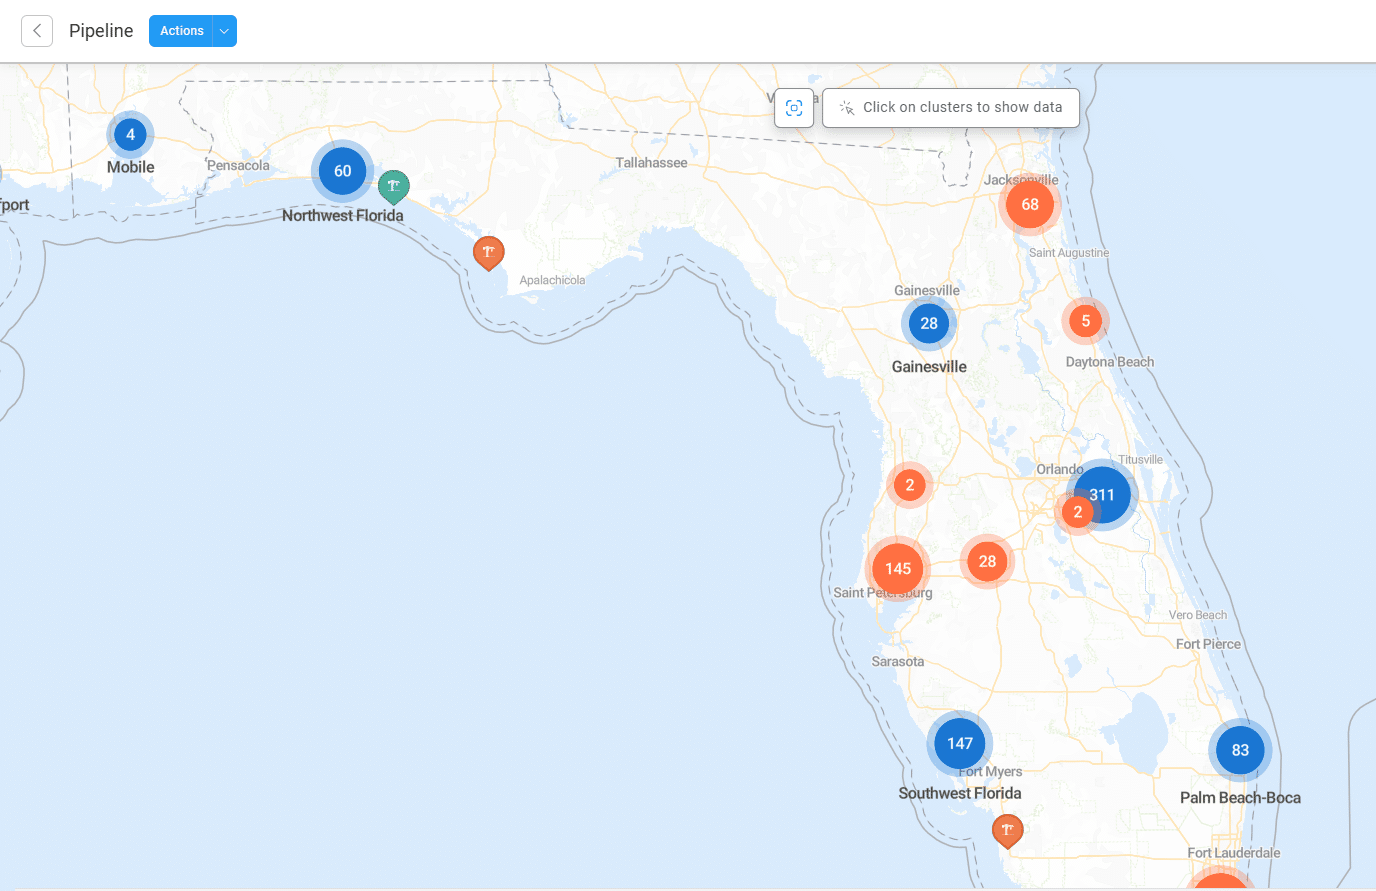 Property data from SMART Apartment Data showing a map of properties in the pipeline in Florida.